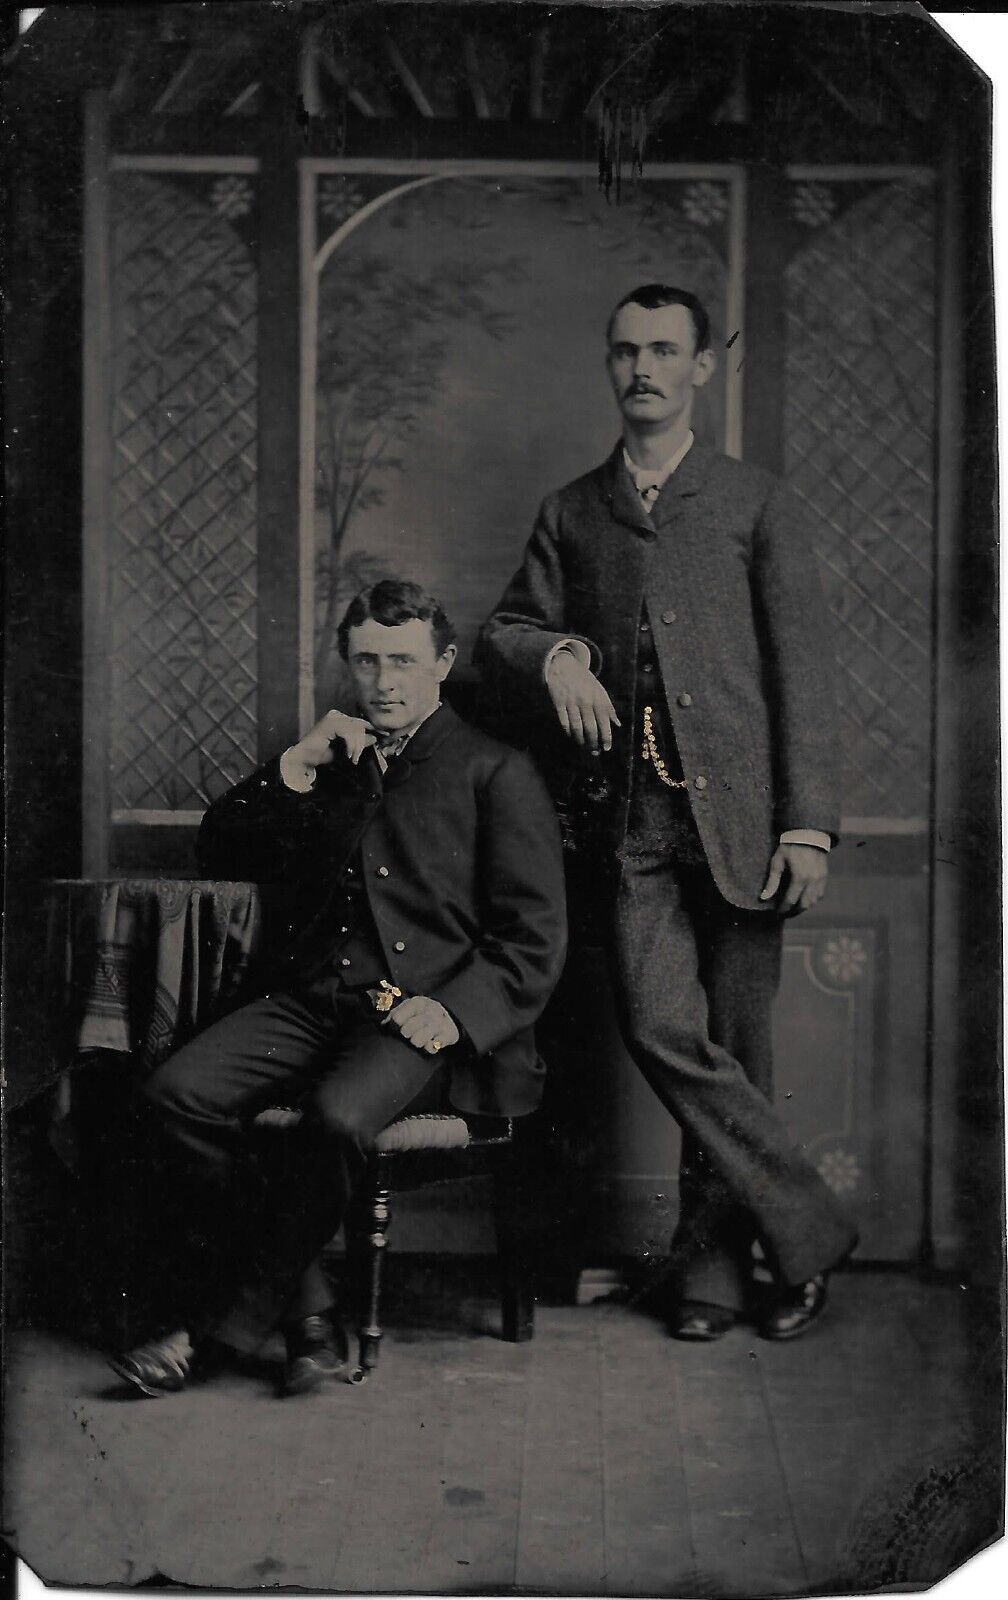 Tintype Men Very Possibly Charley & Robert Ford Jesse James Killer Face-Match